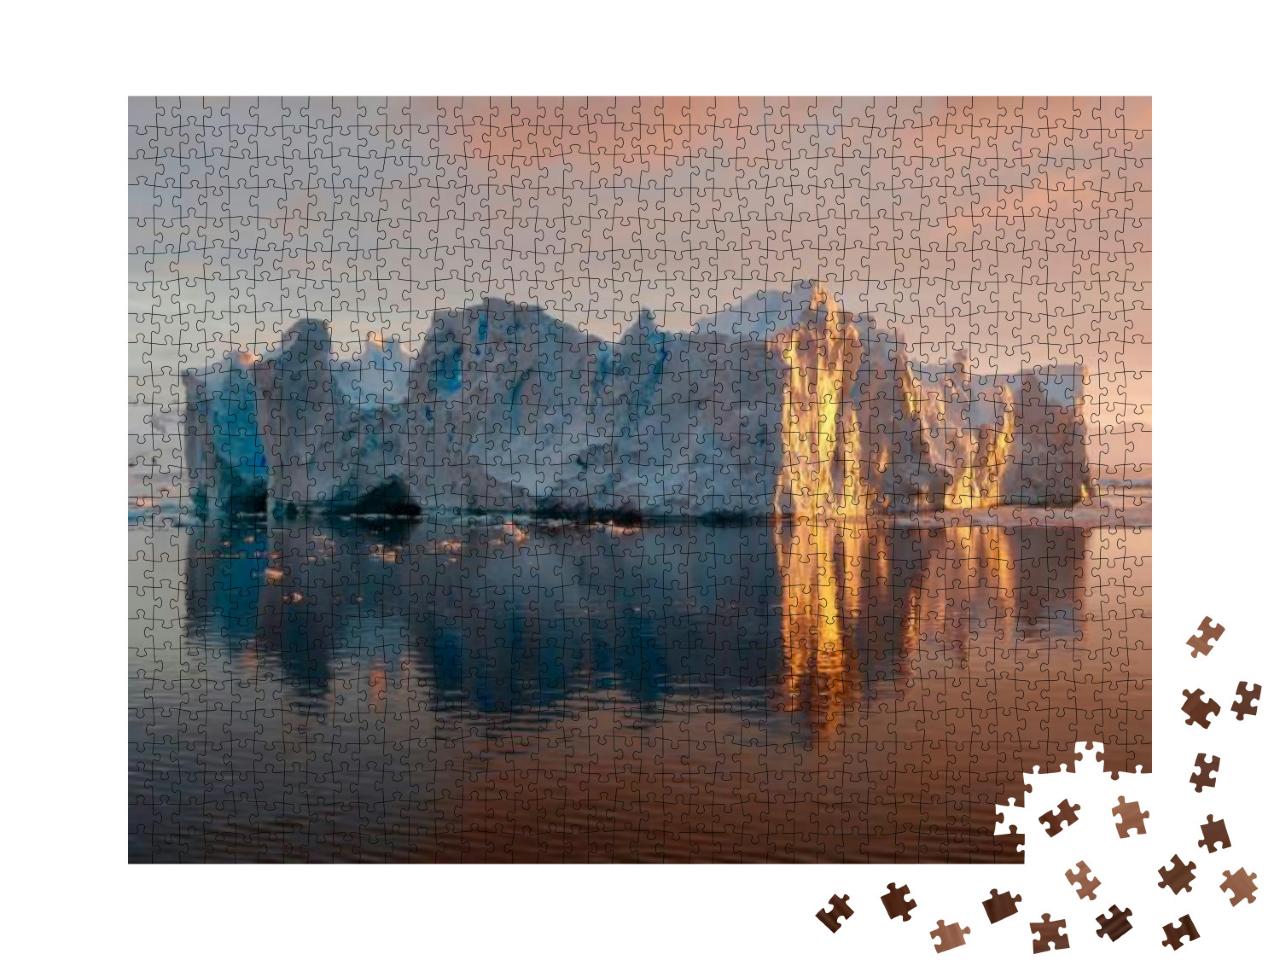 Beautiful Iceberg Reflecting in the Water. Photo Taken At... Jigsaw Puzzle with 1000 pieces